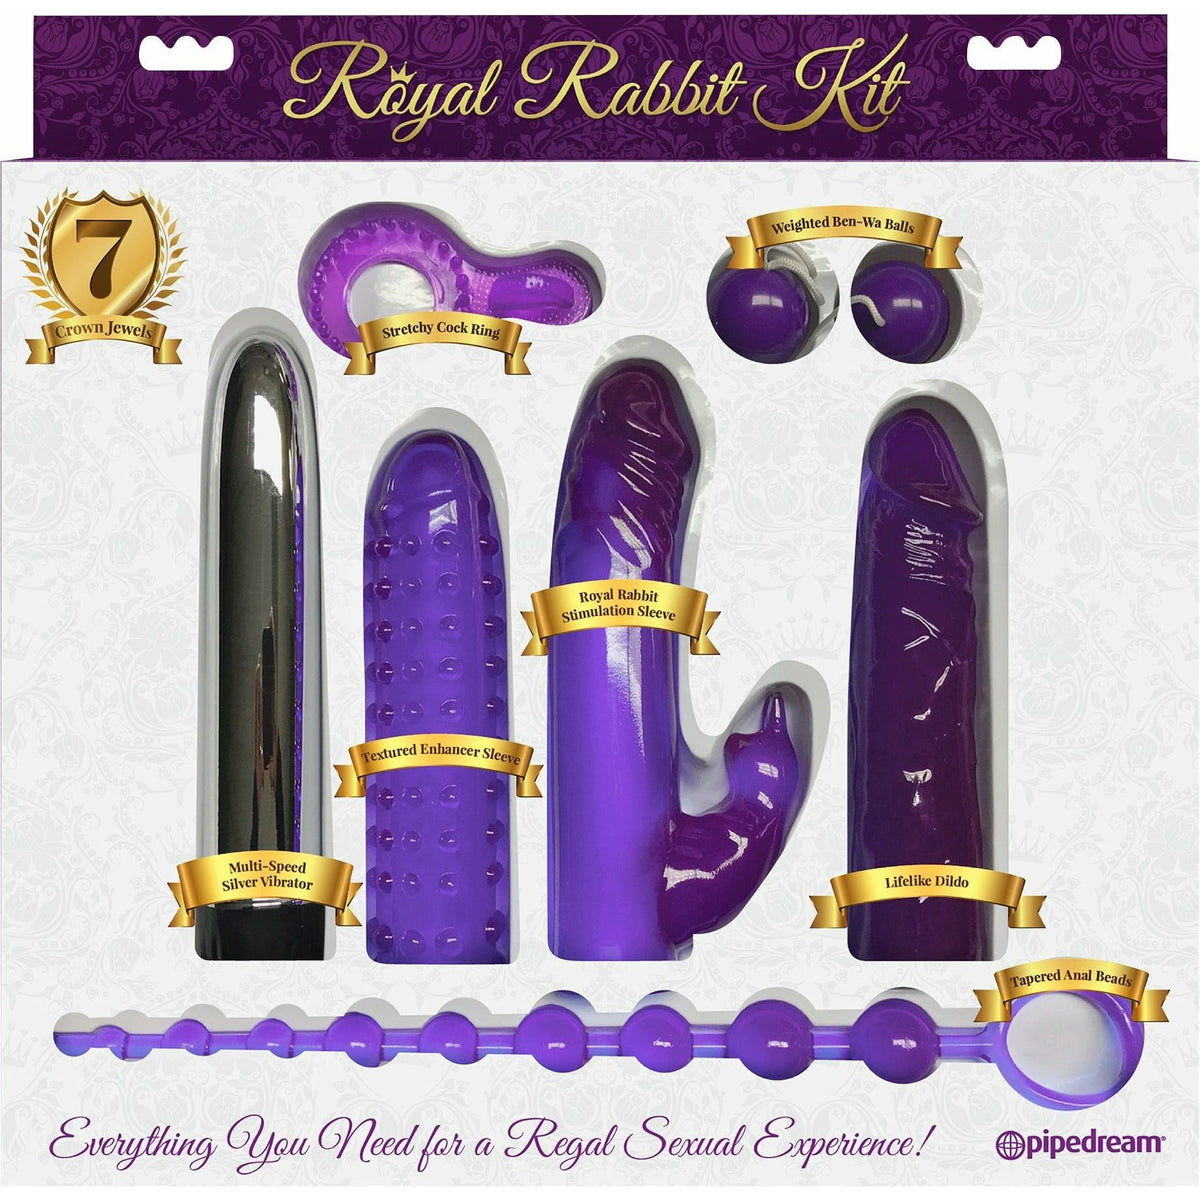 Pipedream Products Royal Rabbit Kit